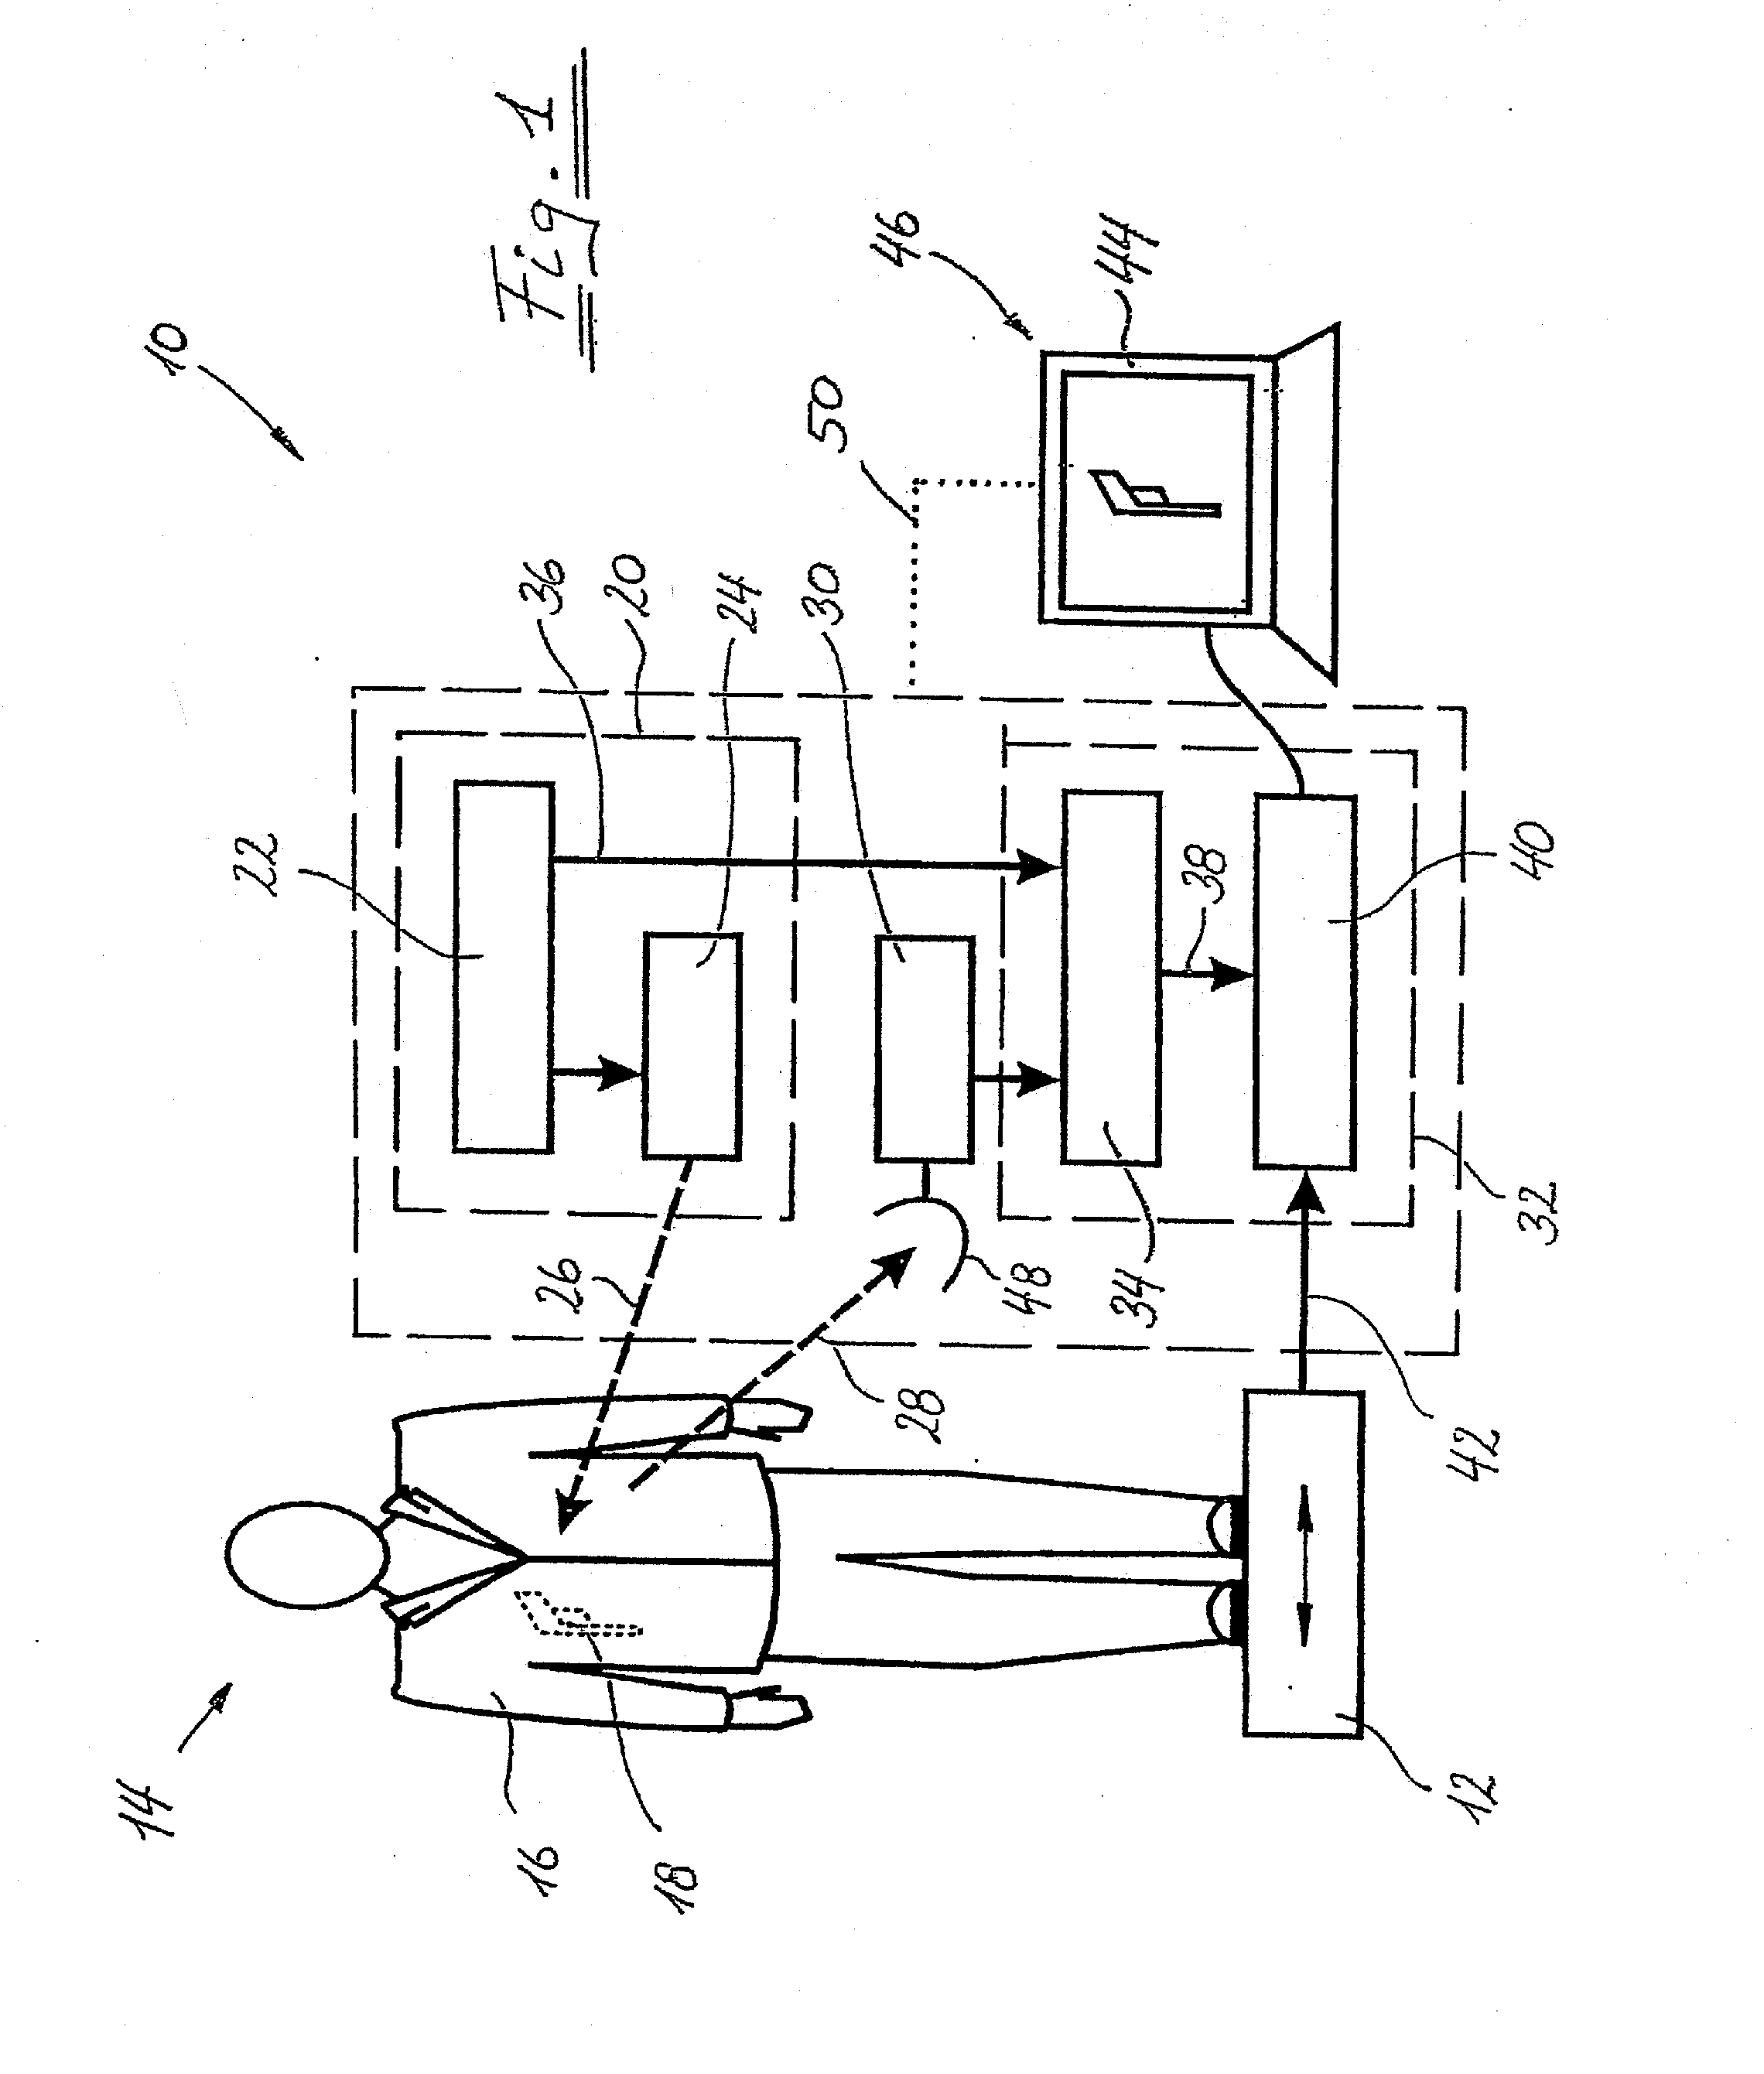 Arrangement and method for detecting an object which is arranged on a body, in particular for carrying out a security check